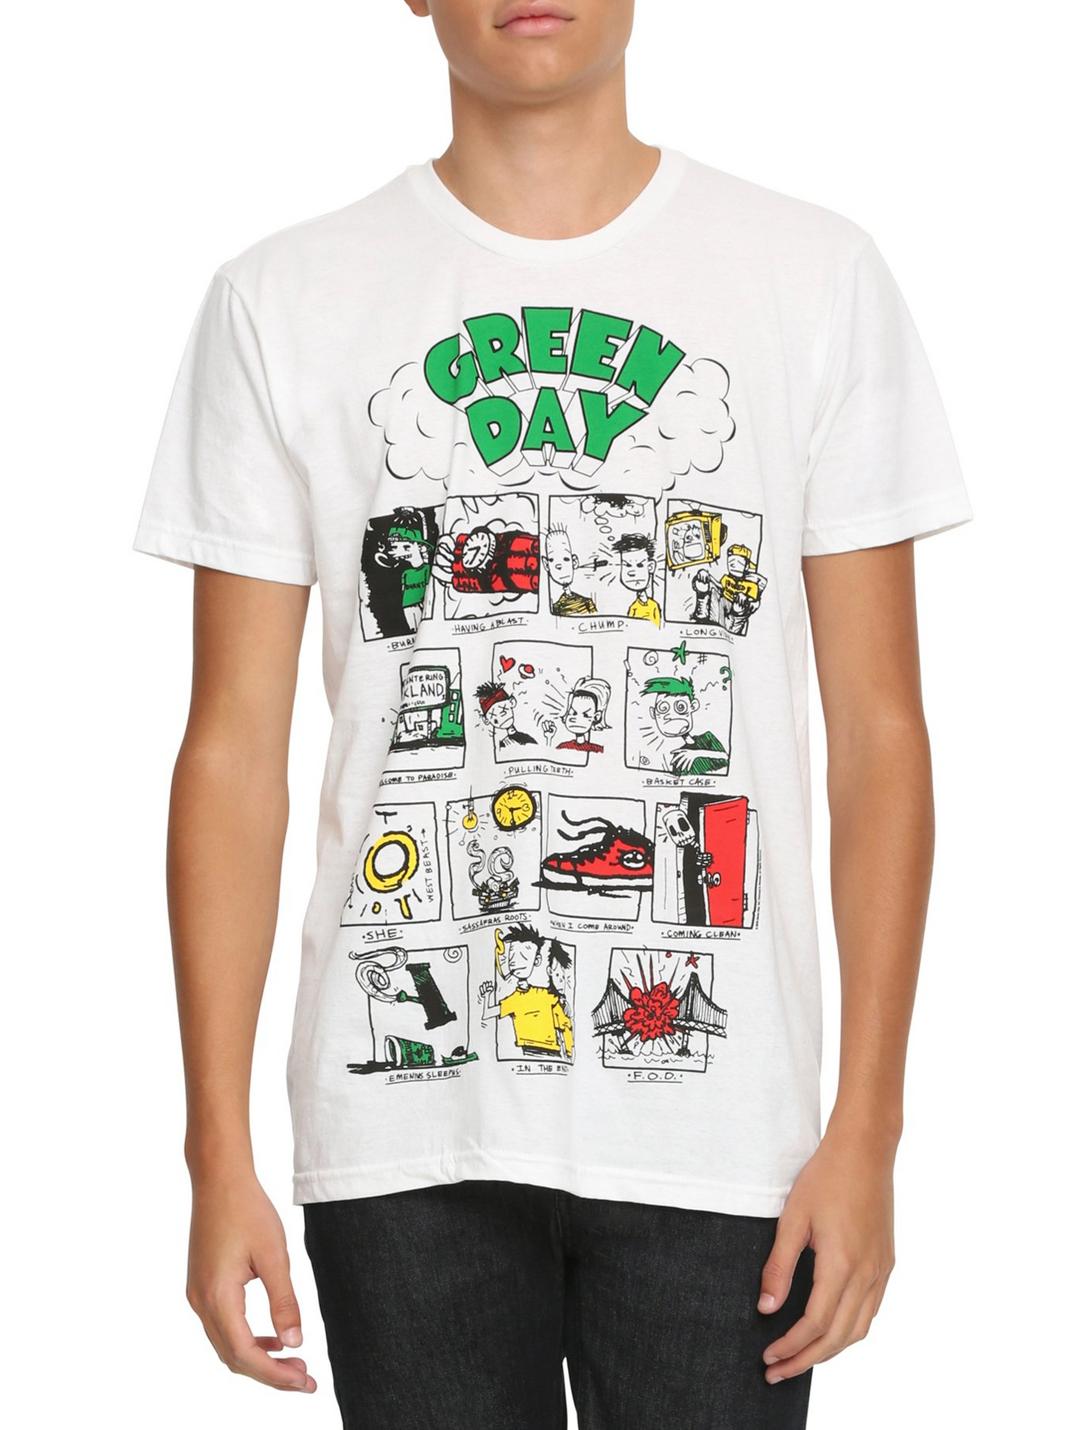 Green Day Dookie Songs T-Shirt, WHITE, hi-res